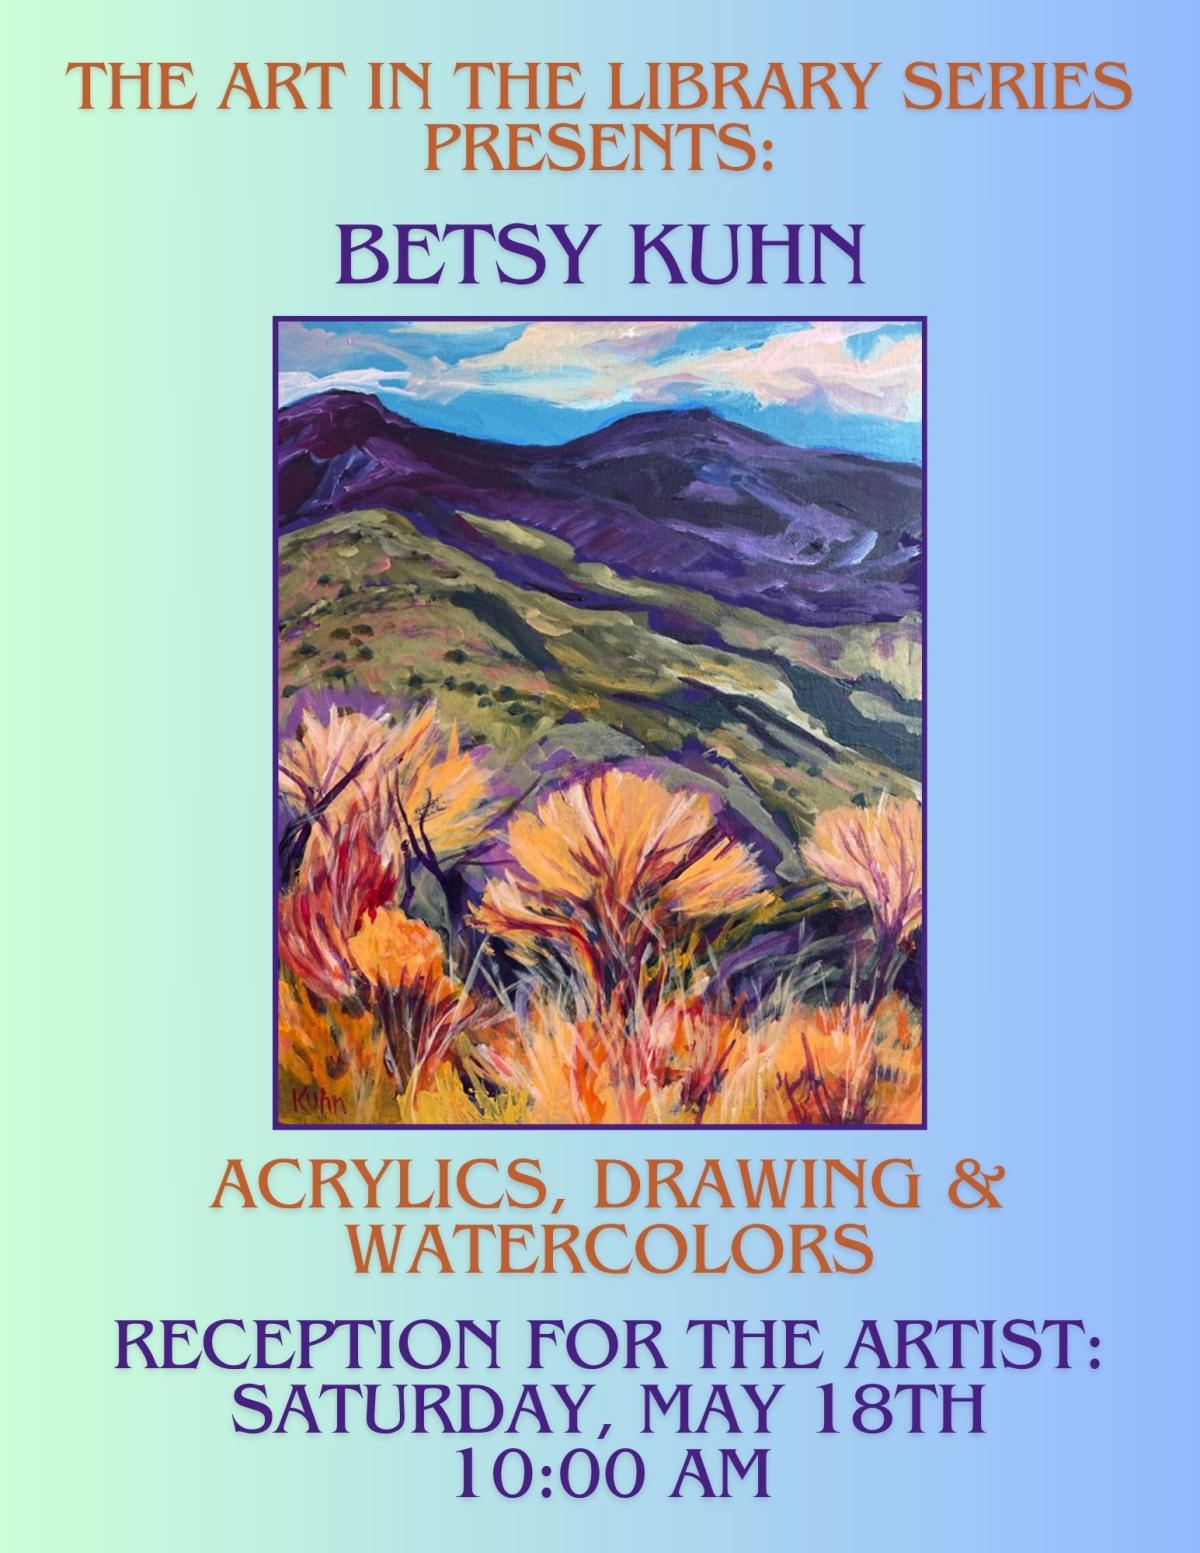 Art in the Library artist Betsy Kuhn